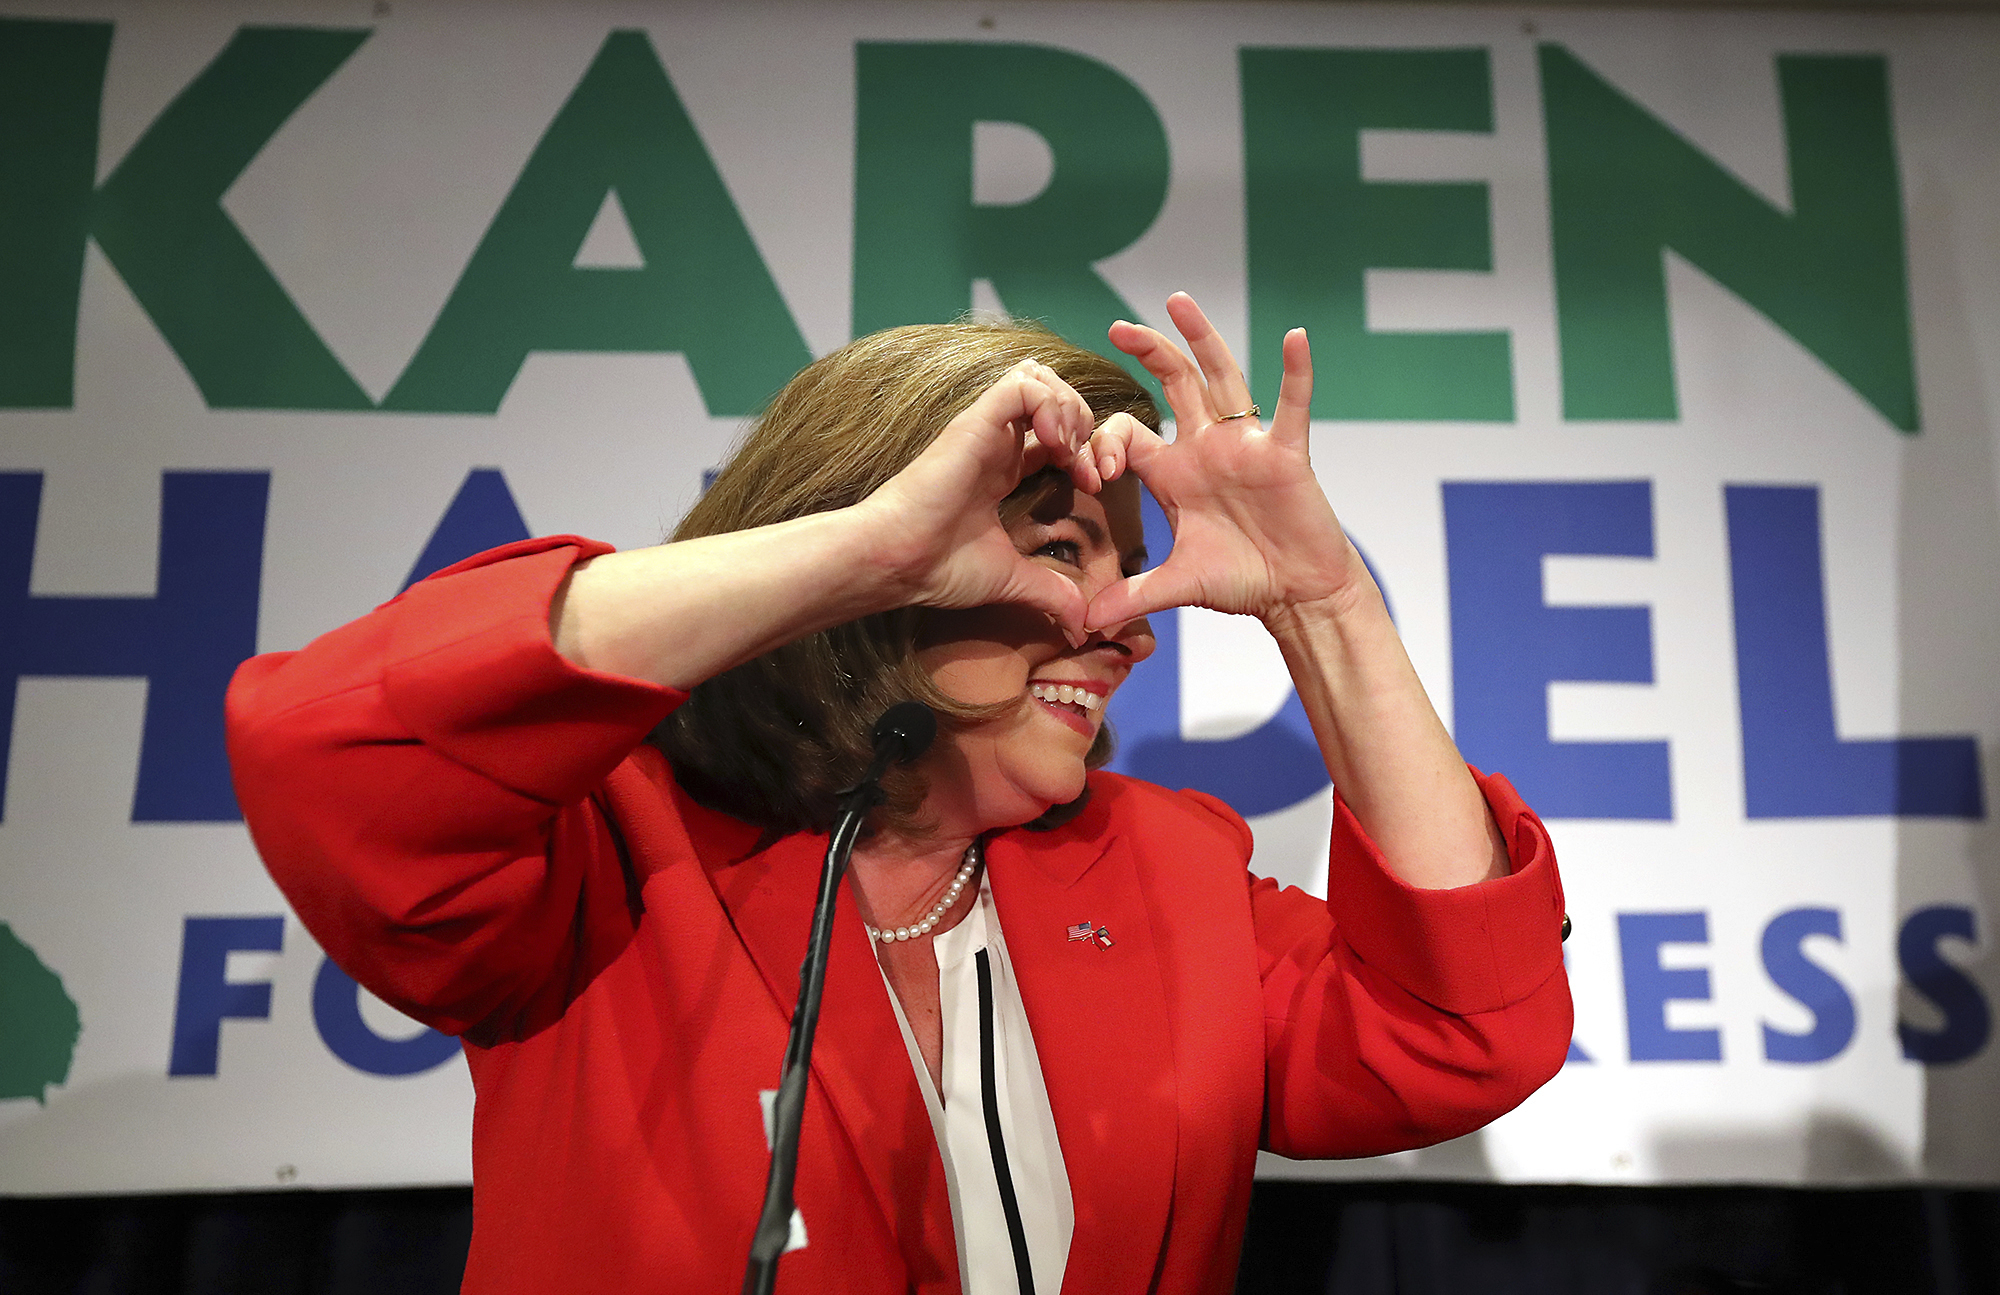 Karen Handel makes a heart symbol while making an early appearance to thank her supporters after the first returns came in during her election night party in the 6th District race with Jon Ossoff on Tuesday, June 20, 2017, in Atlanta. (Curtis Compton/Atlanta Journal-Constitution via AP)